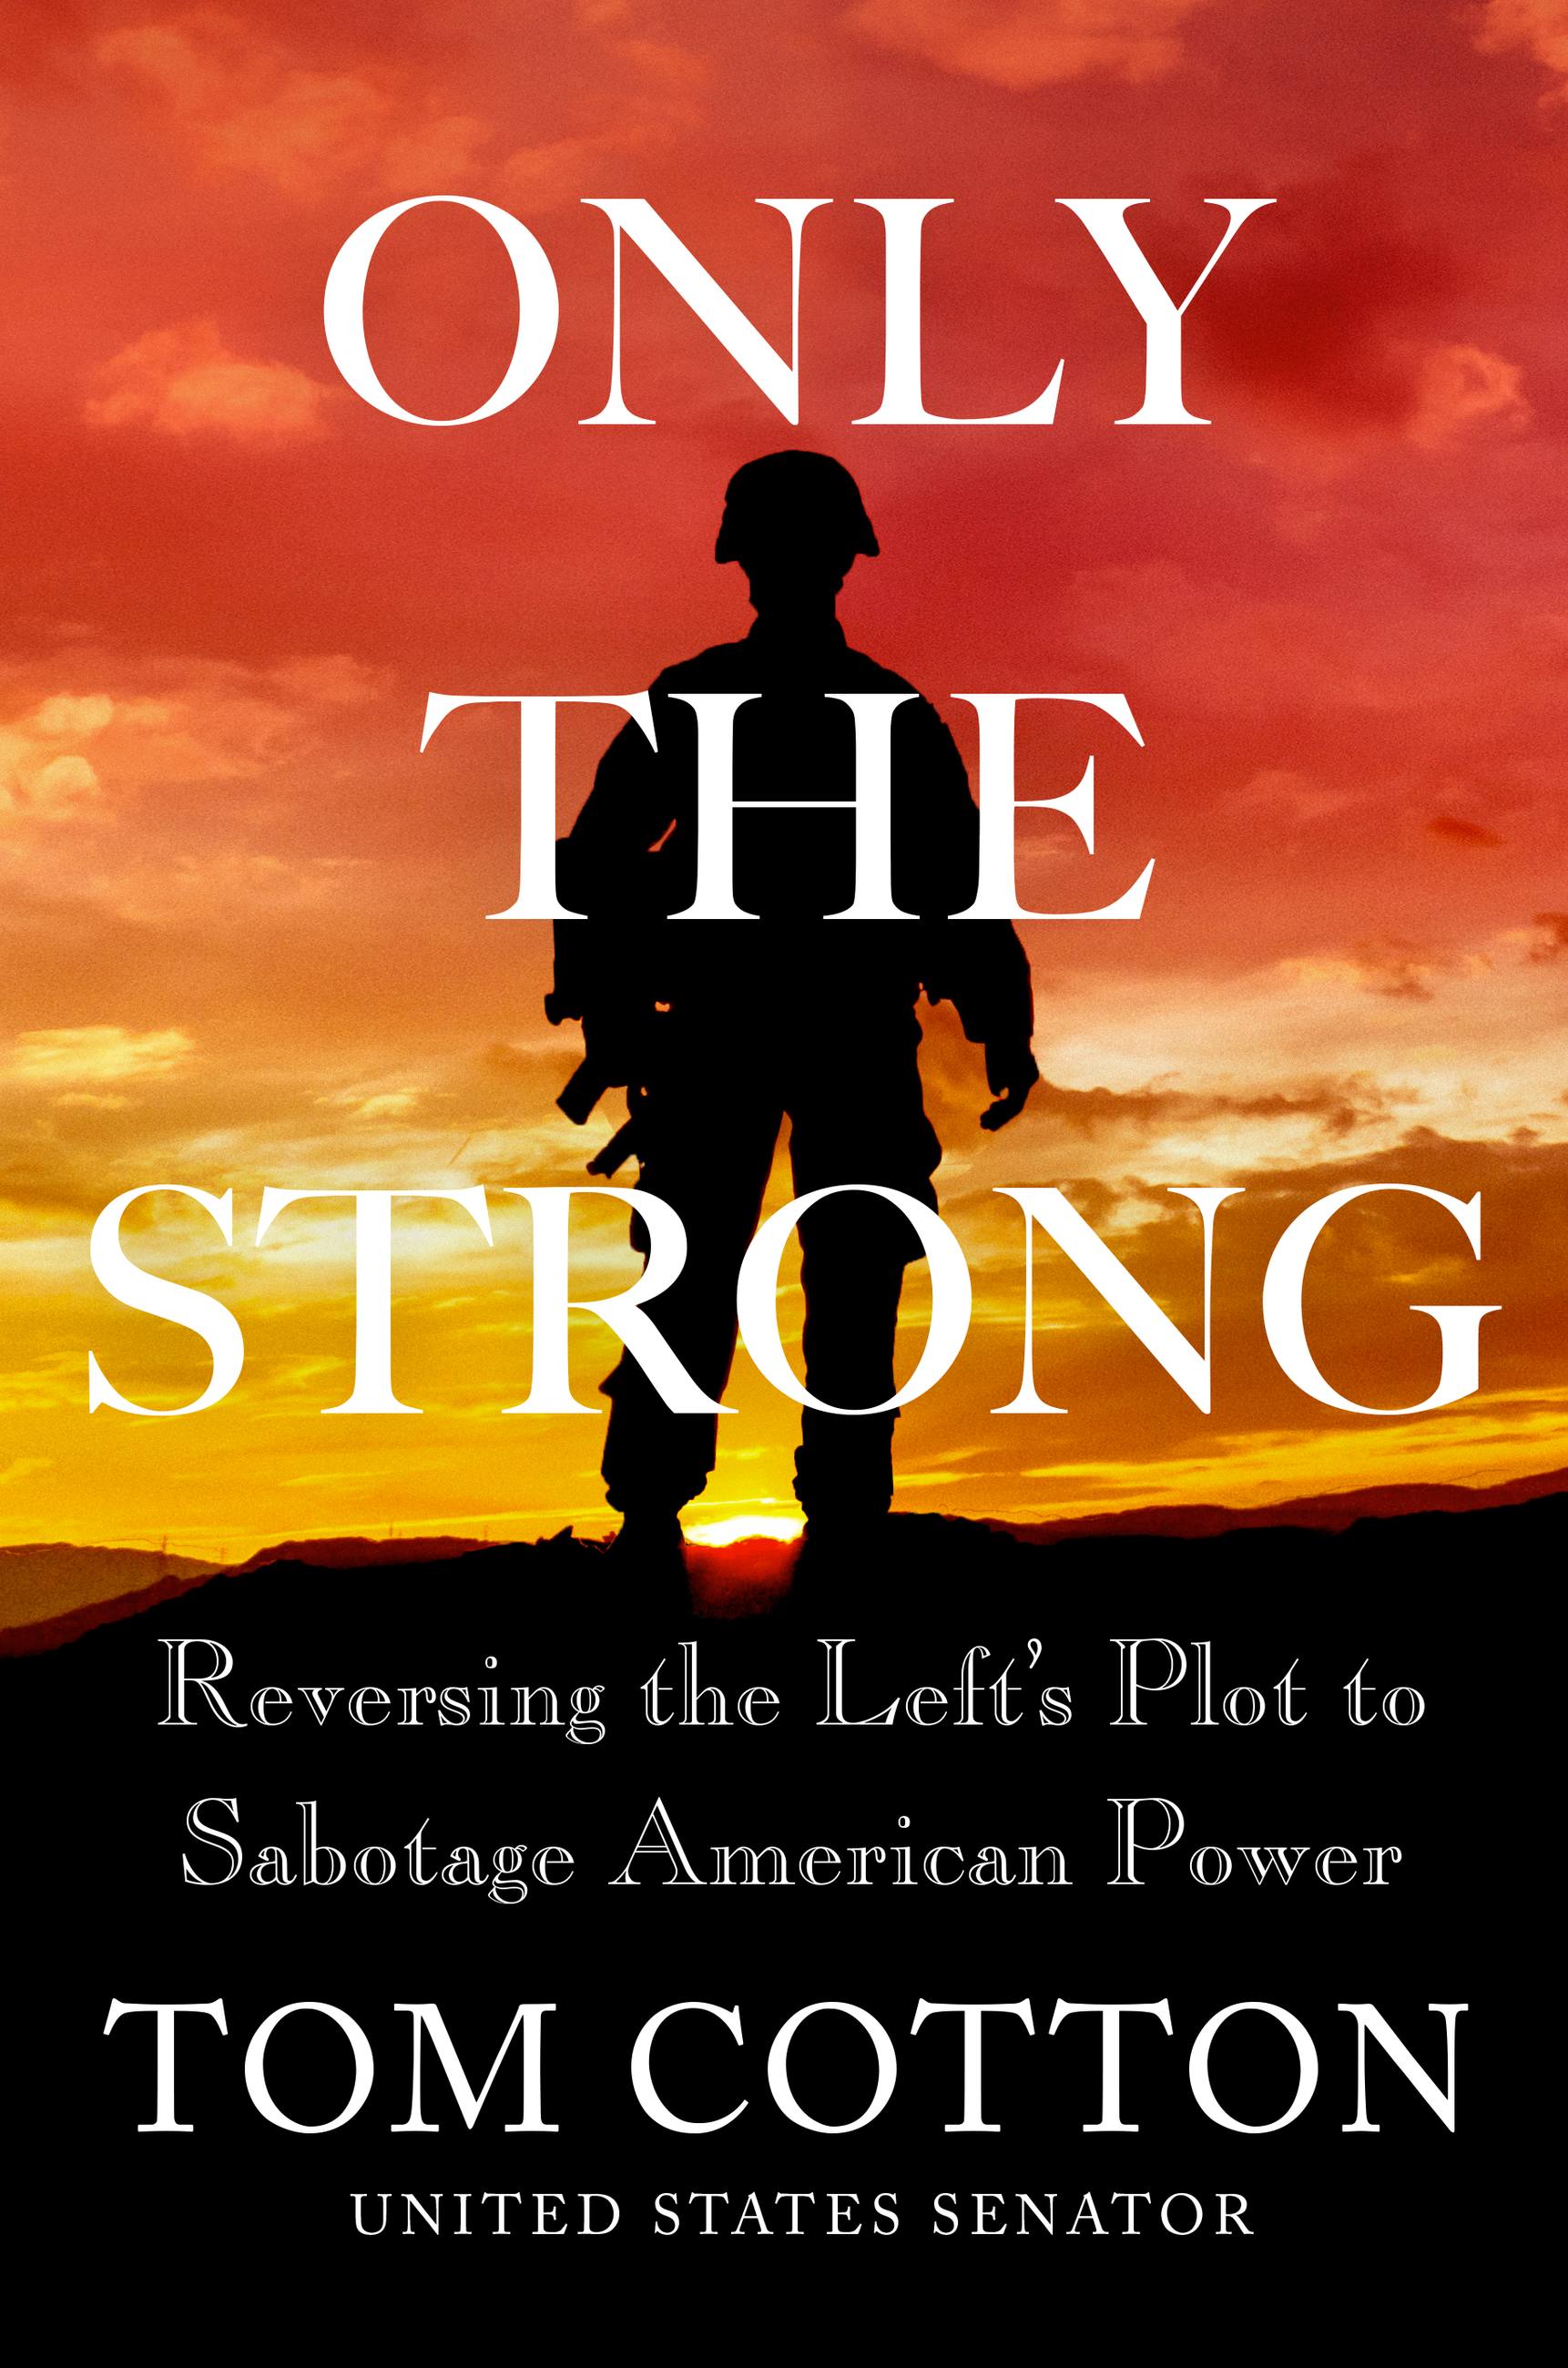 Only the Strong by Tom Cotton